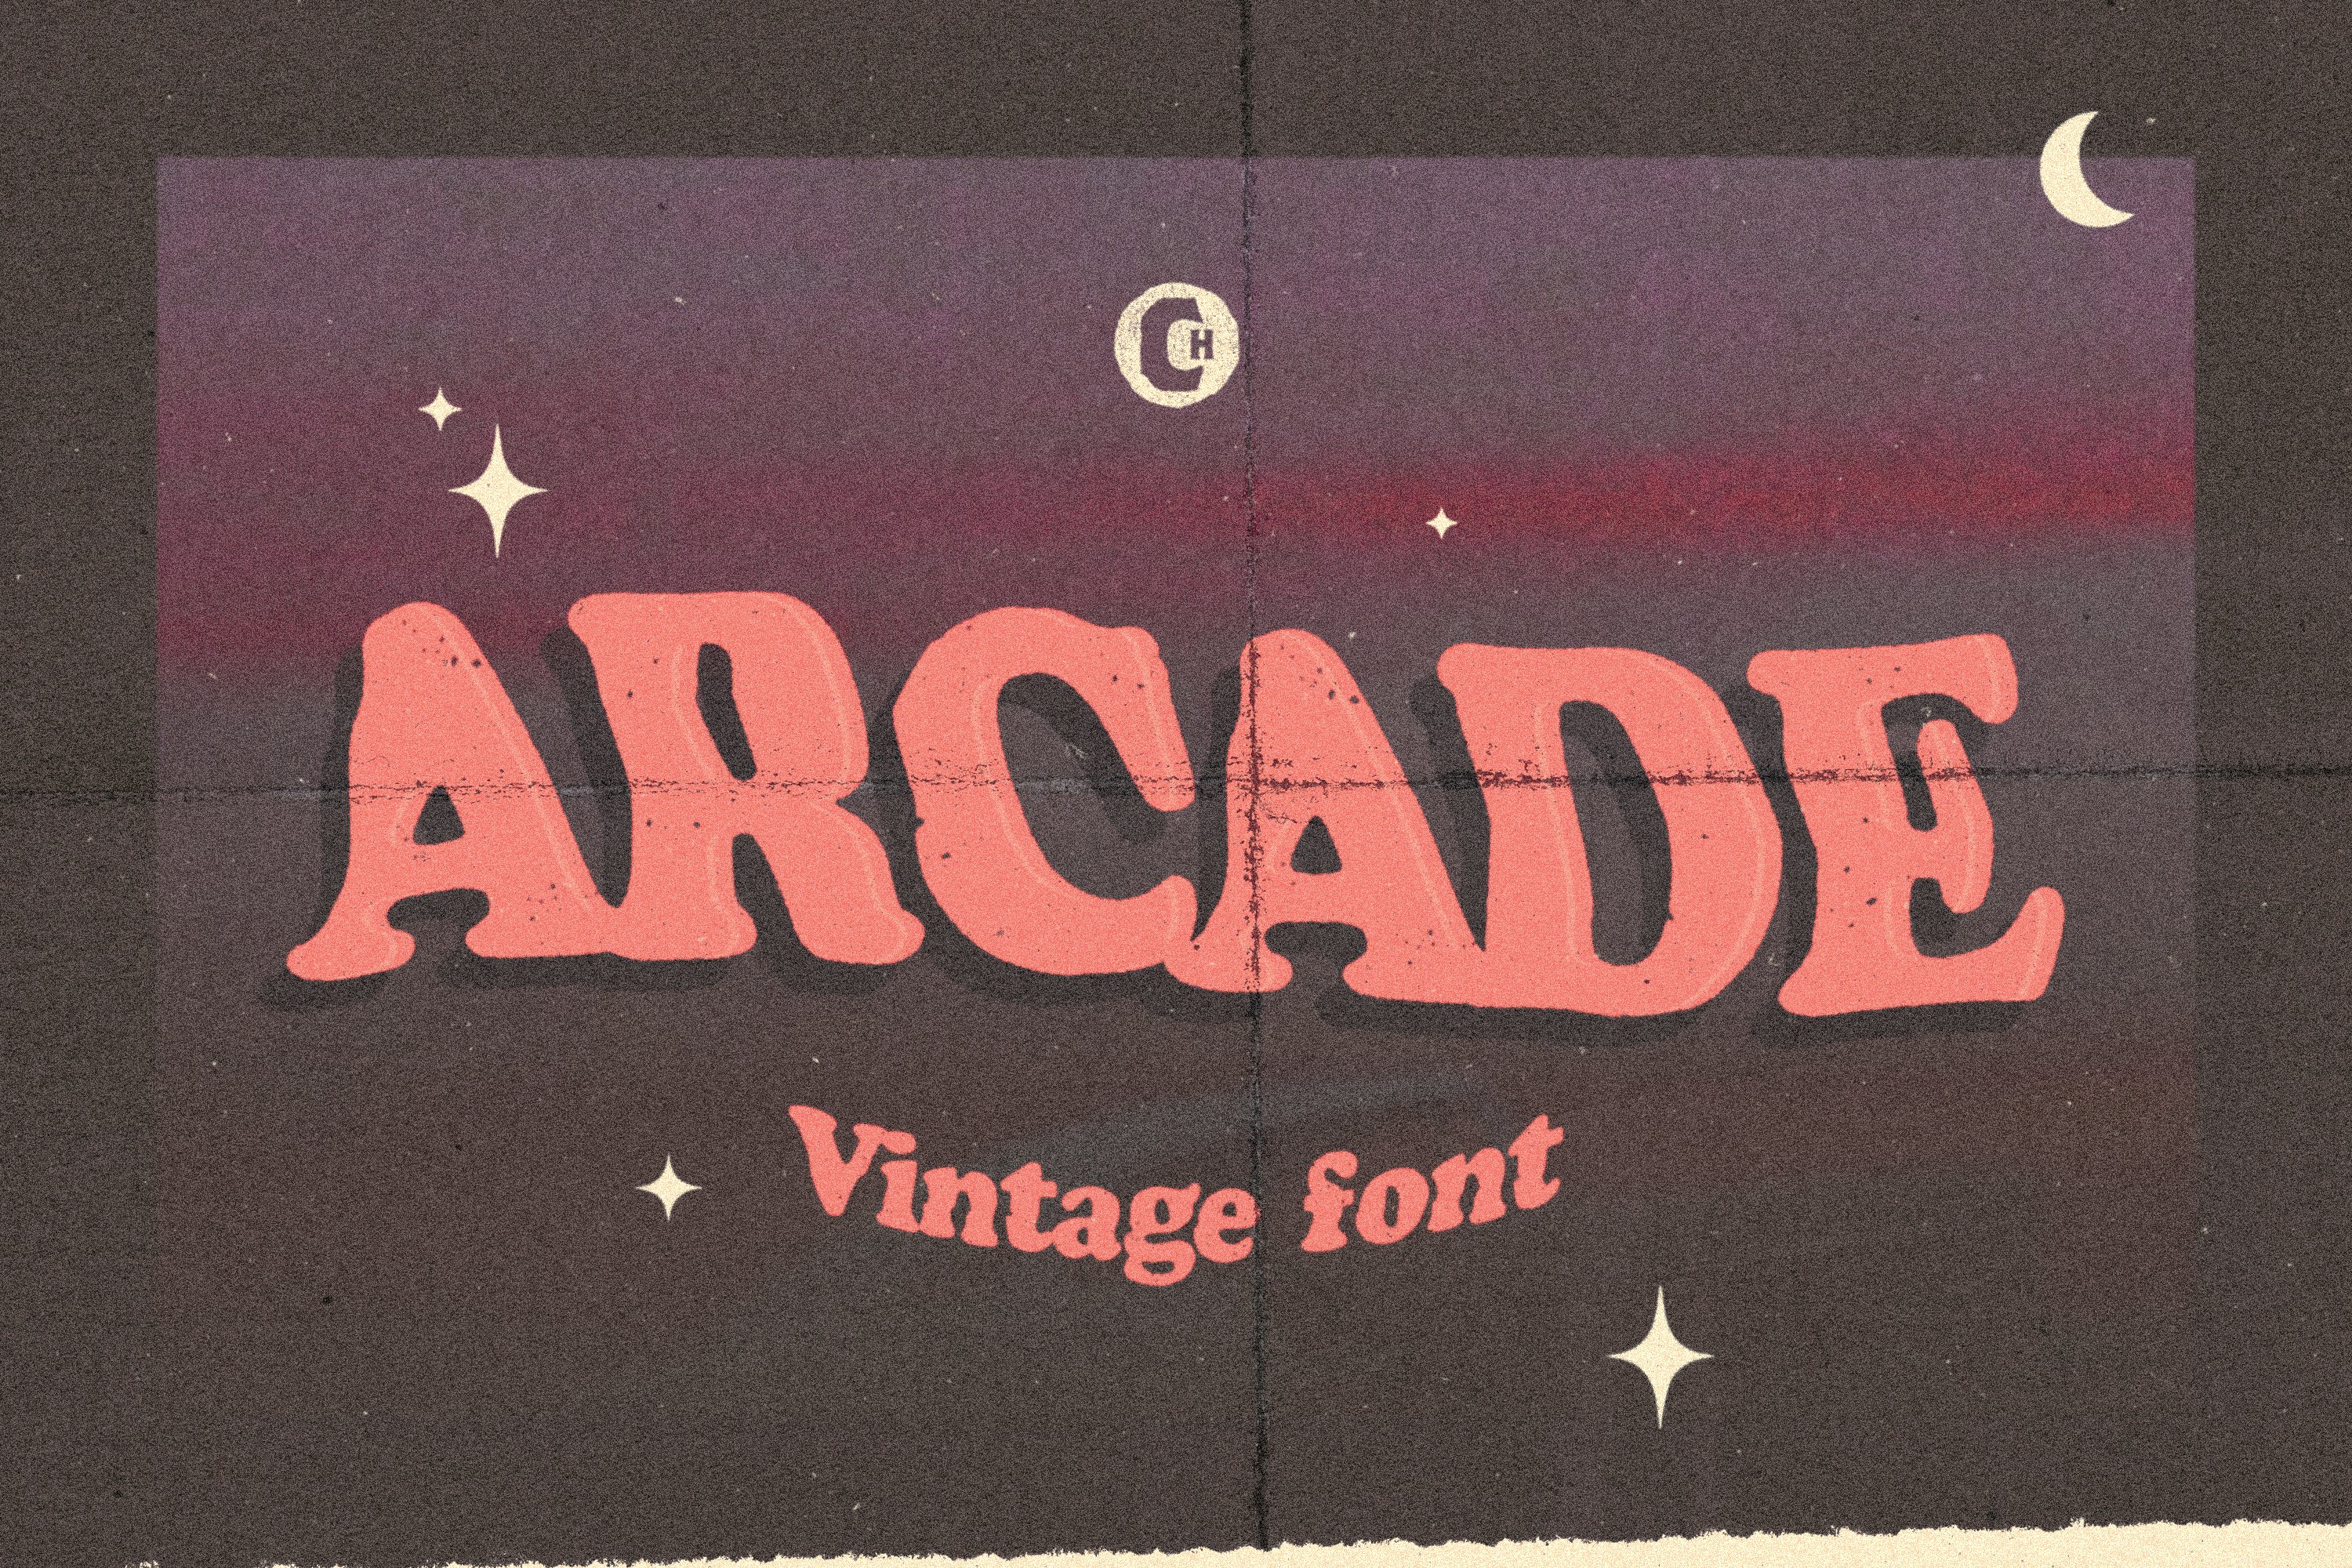 ARCADE Font cover image.